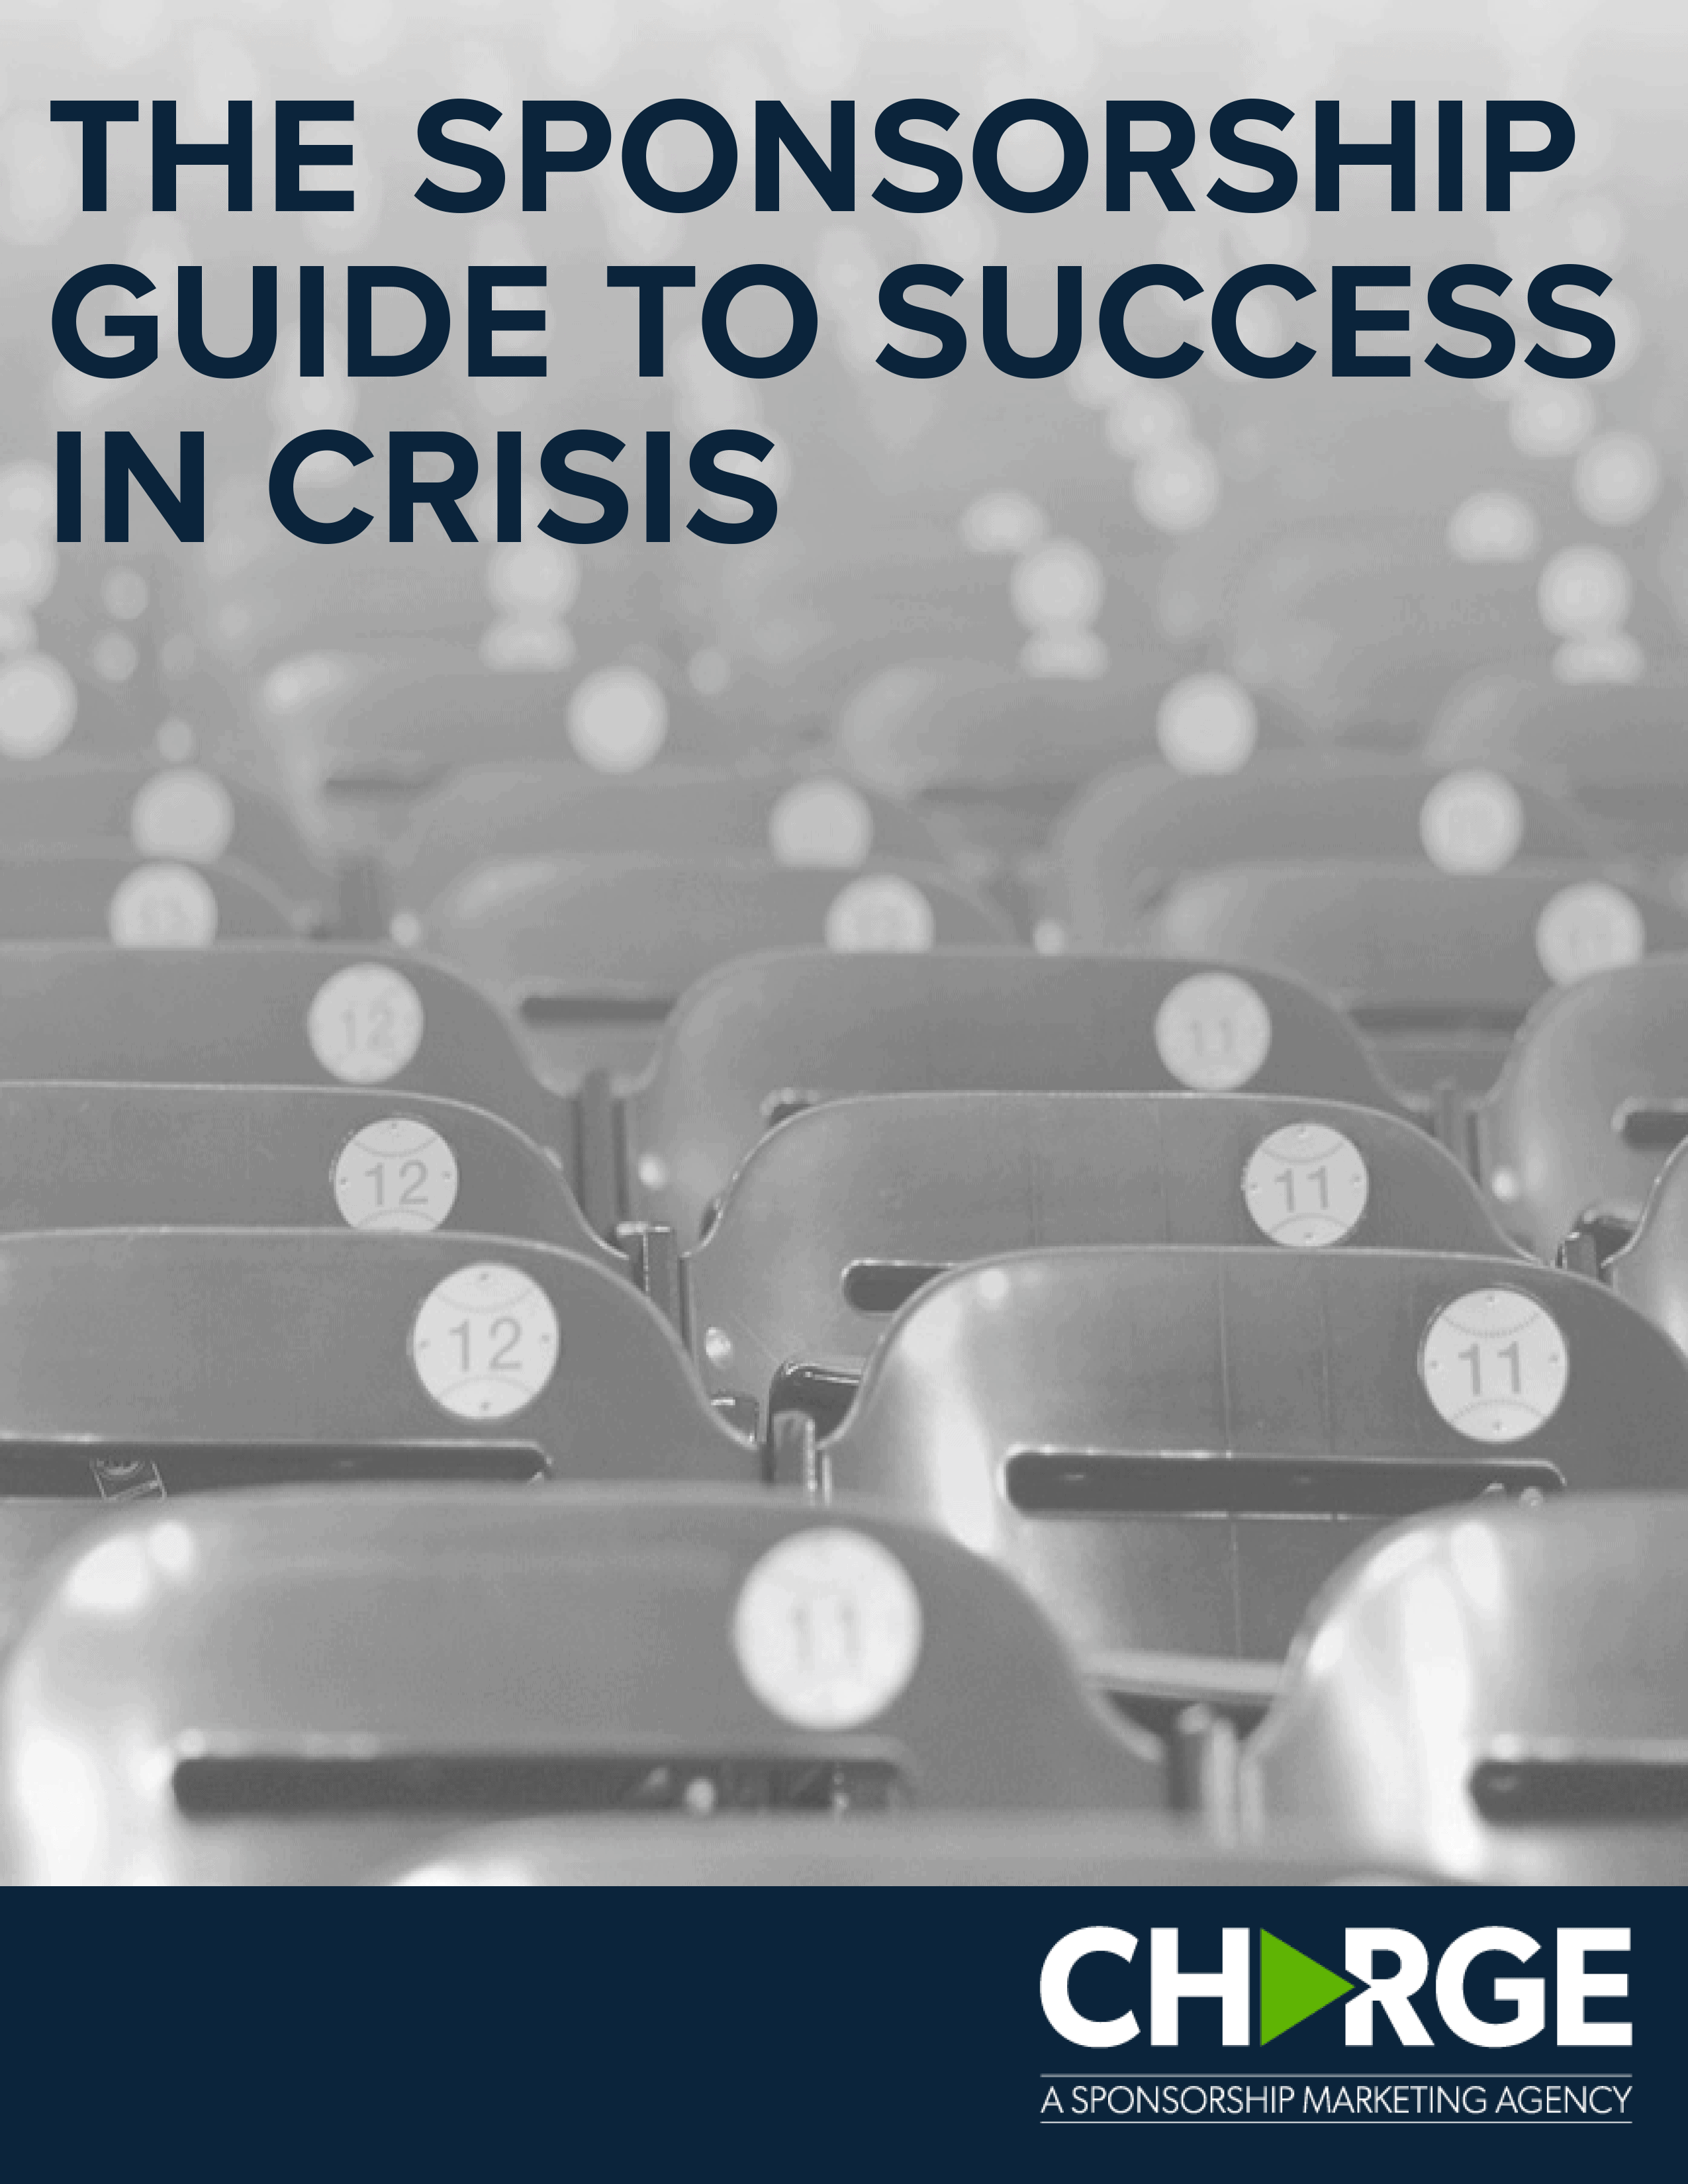 THE SPONSORSHIP GUIDE TO SUCCESS IN CRISIS